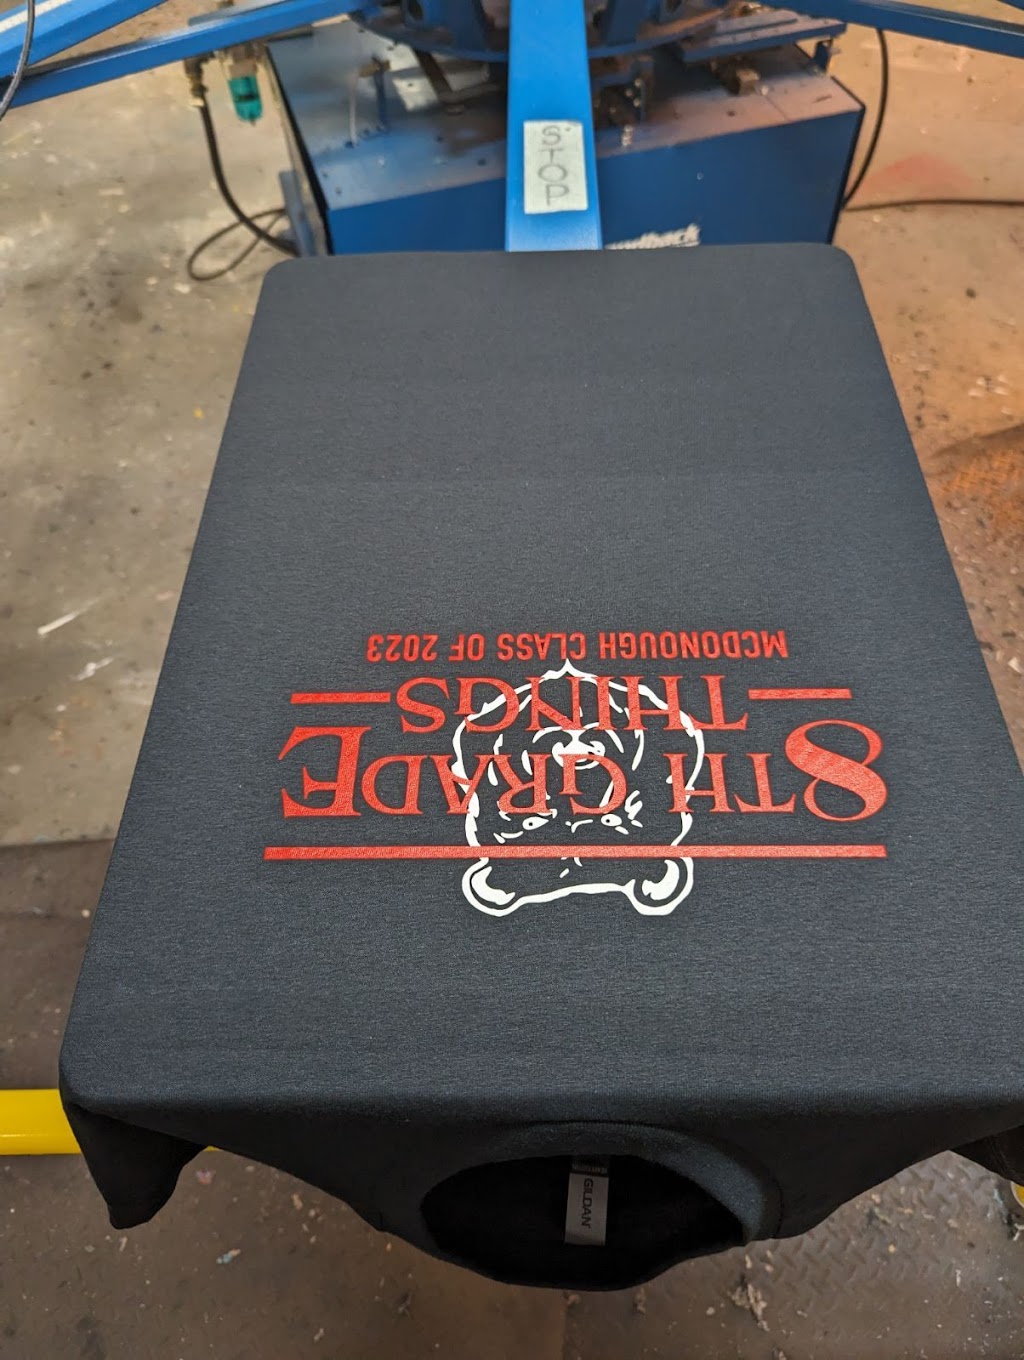 ARM SCREEN PRINTING | 307 E Center St, Manchester, CT 06040 | Phone: (860) 649-6295